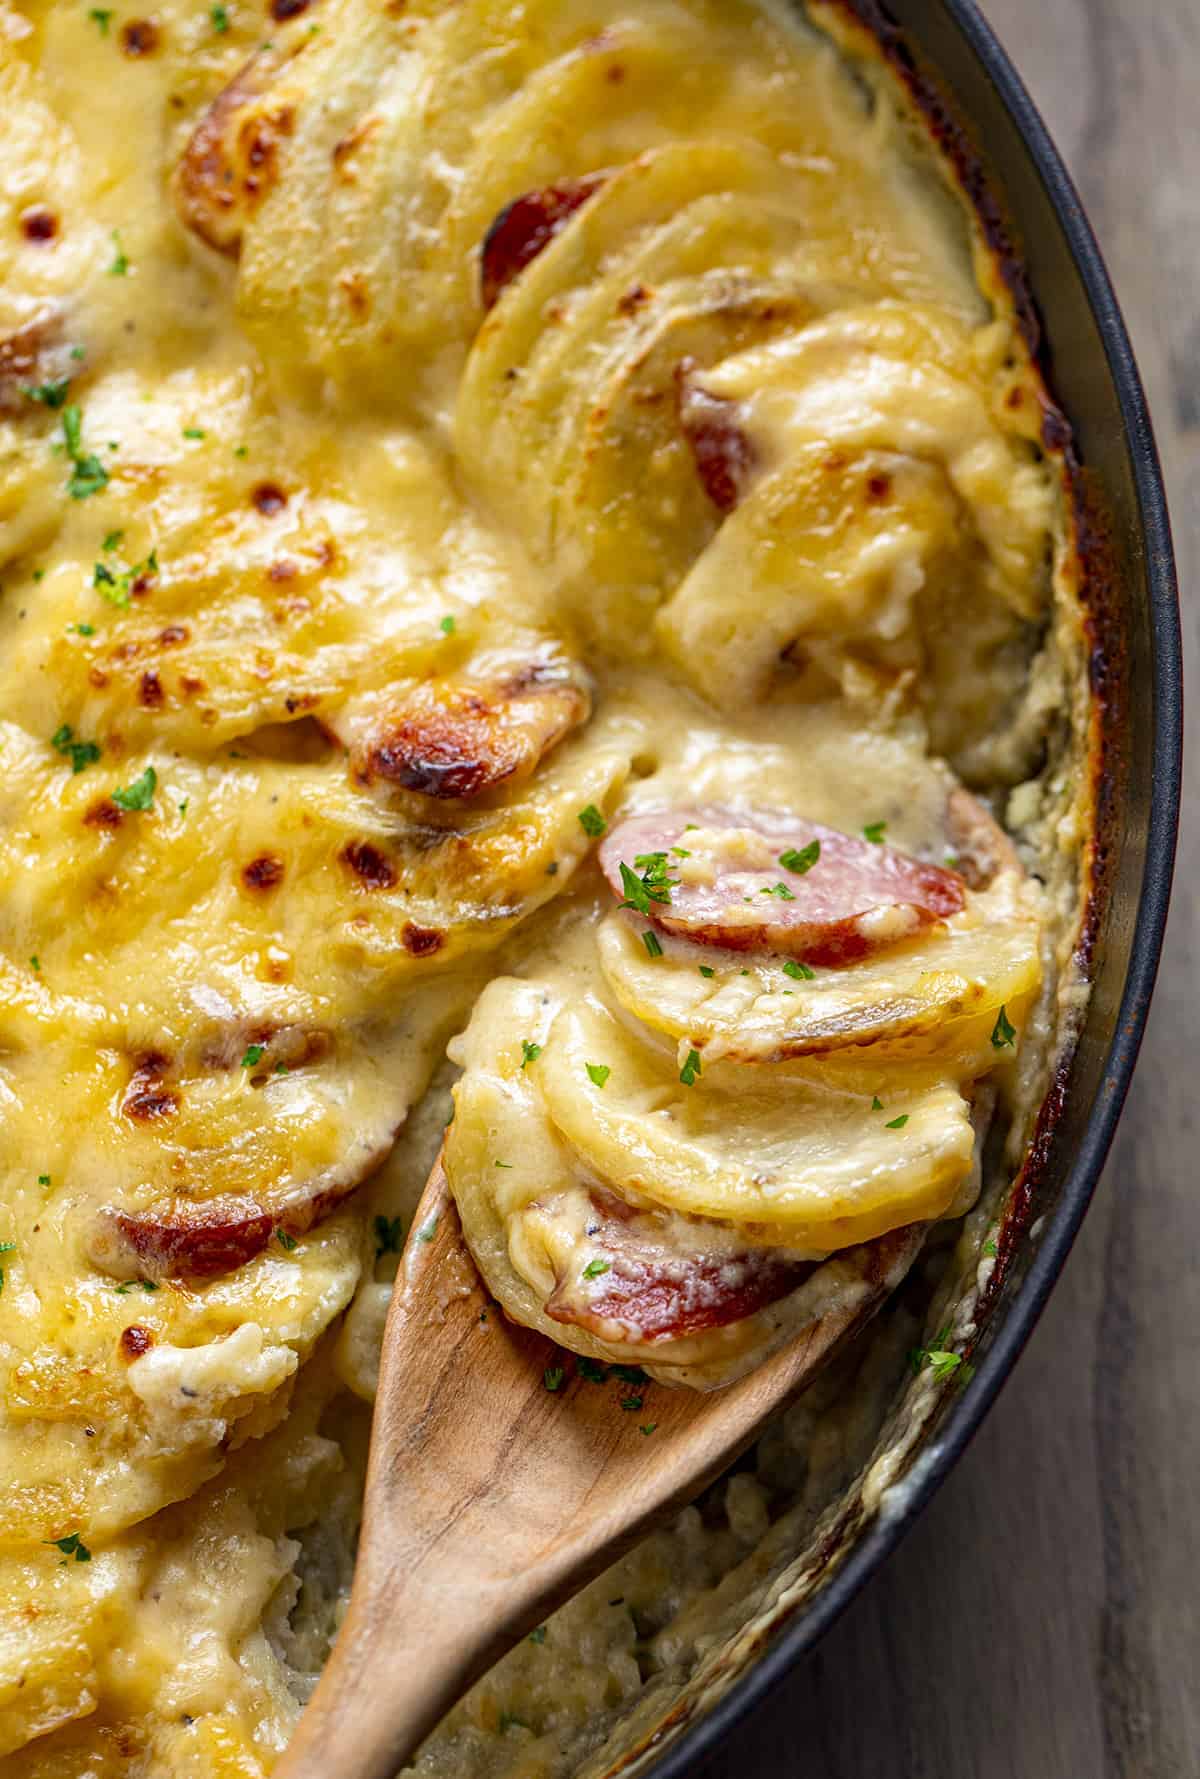 Spoonful of Potatoes Au Gratin with Smoked Sausage 